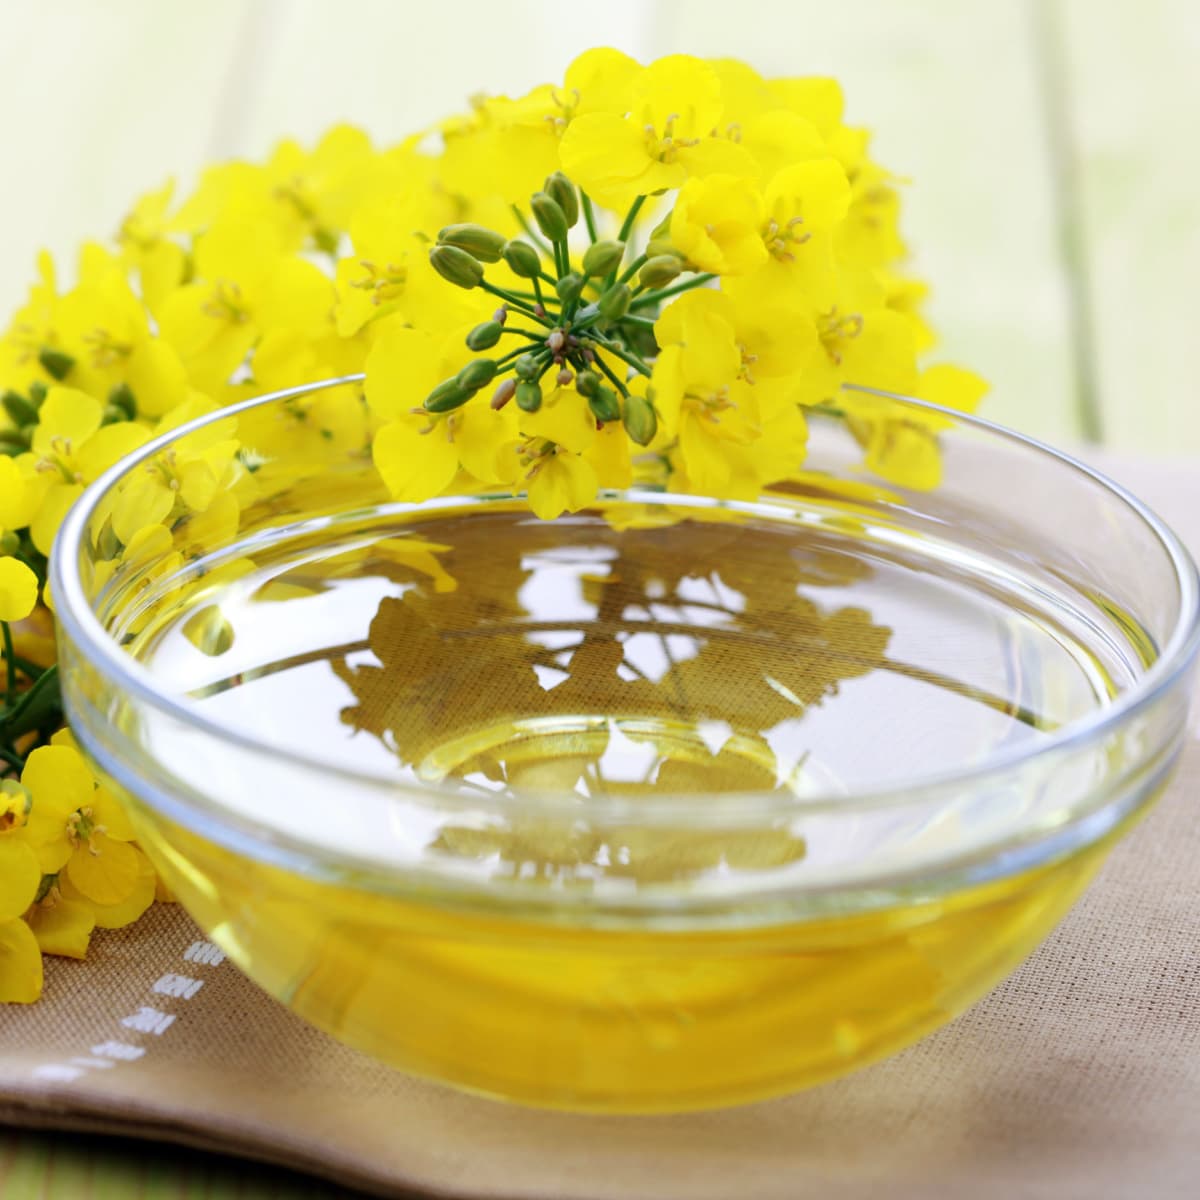 Bowl of Canola Oil on a Rustic Mat